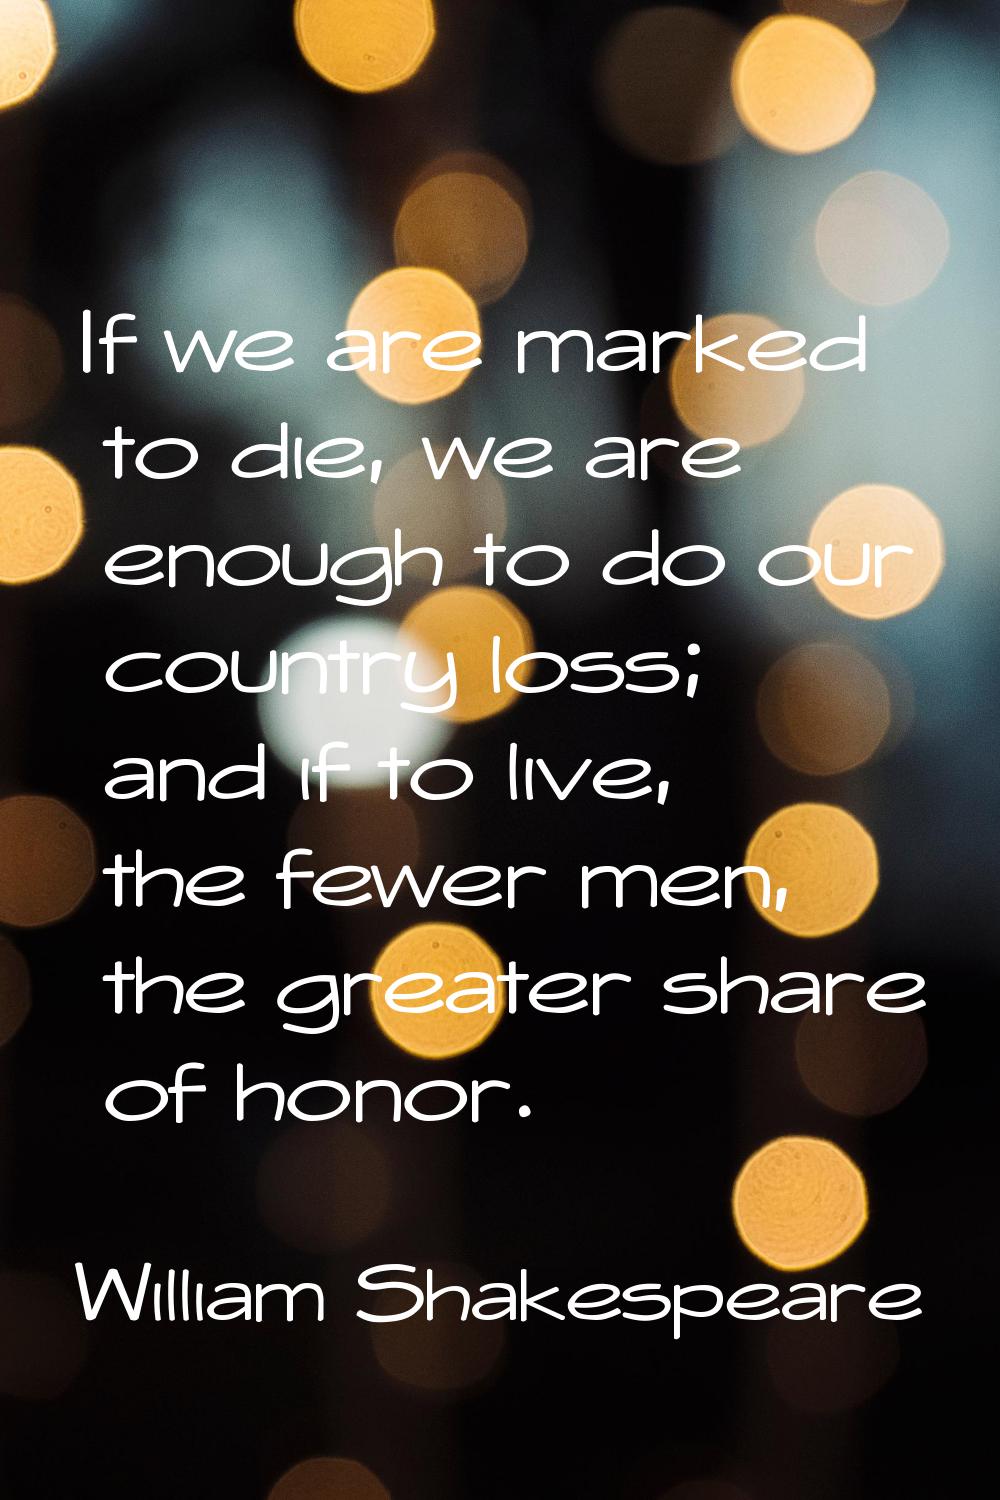 If we are marked to die, we are enough to do our country loss; and if to live, the fewer men, the g